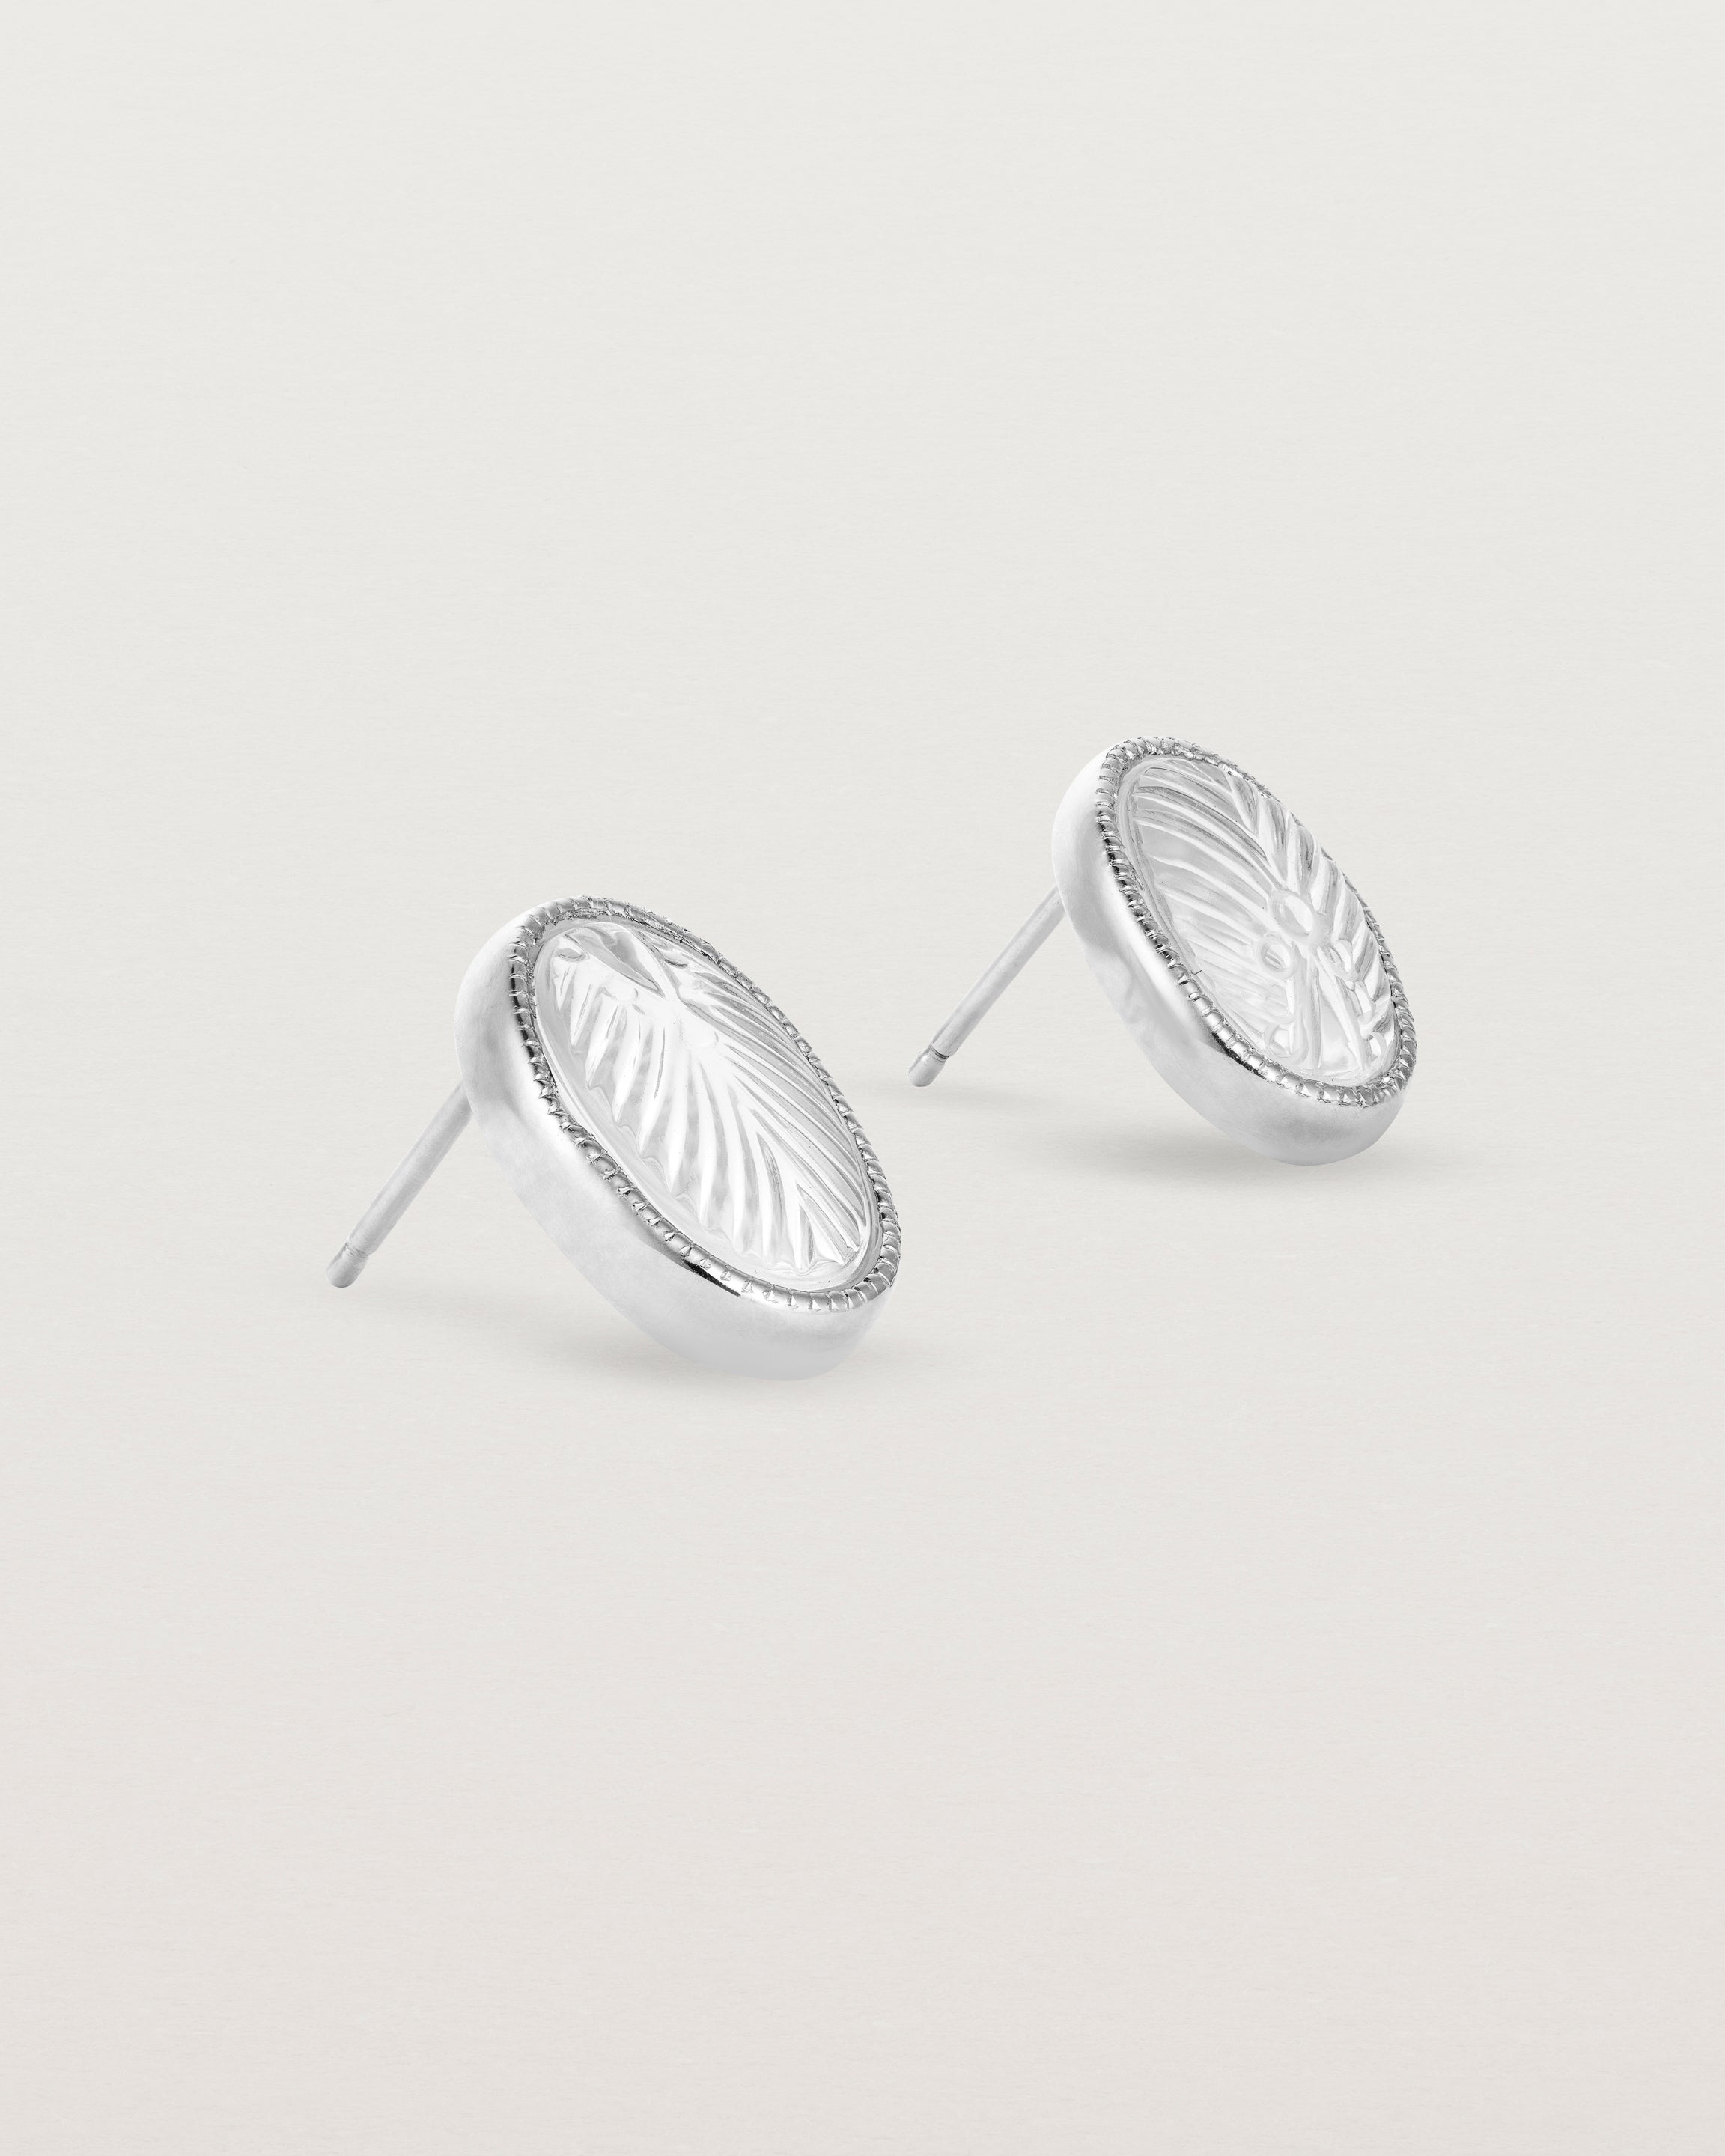 A pair of large oval sterling silver studs featuring carved quartz